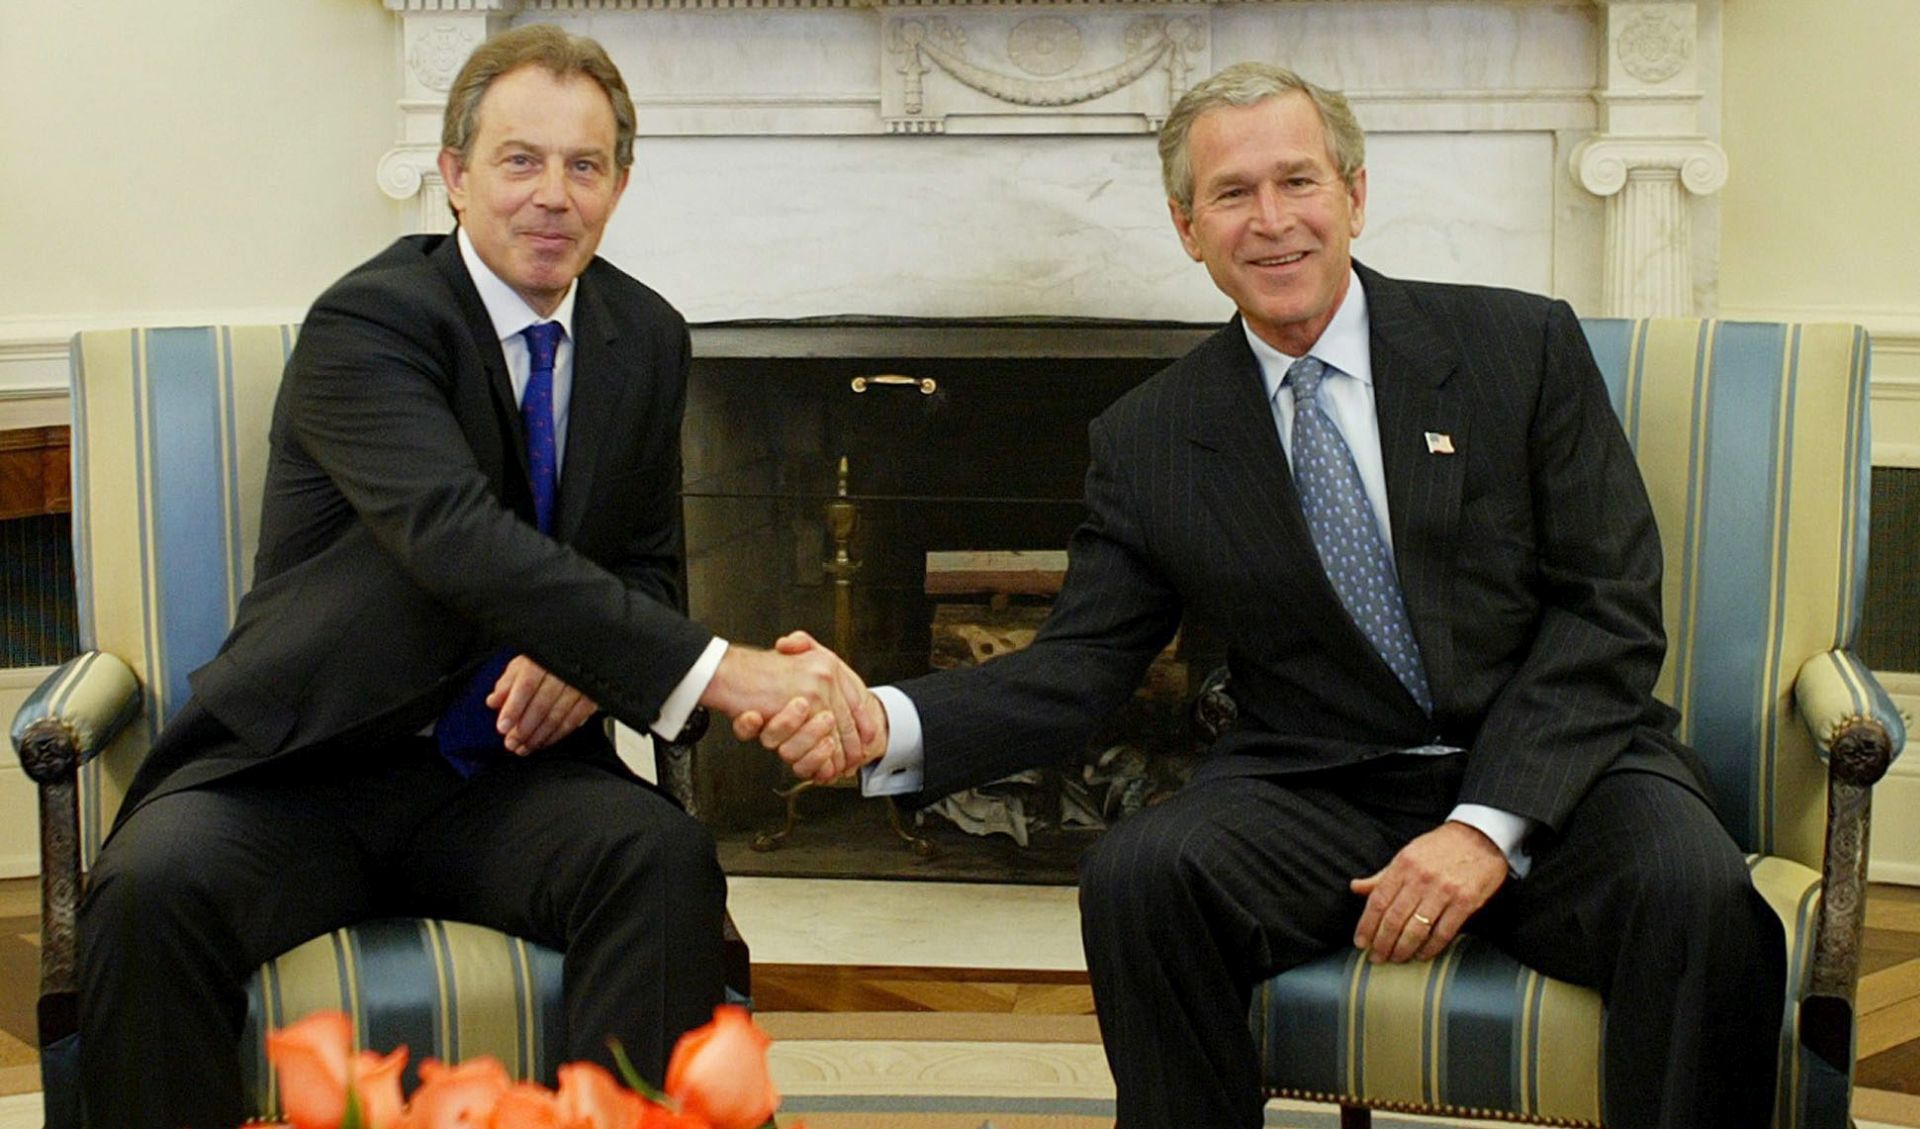 epa05410203 (FILE) A file photo dated 16 April 2004 showing then US President George W. Bush (R) shaking hands with then British Prime Minister Tony Blair in the Oval Office at the White House, Washington, USA. The report by Sir John Chilcot on whether it was right and neccessary to invade Iraq concluded 06 July 2016 the invasion and subsequent war against Iraq was 'not the last resort'. Chilcot also said US and British policy on Iraq based on 'flawed intelligence and assessments'.  EPA/SHAWN THEW